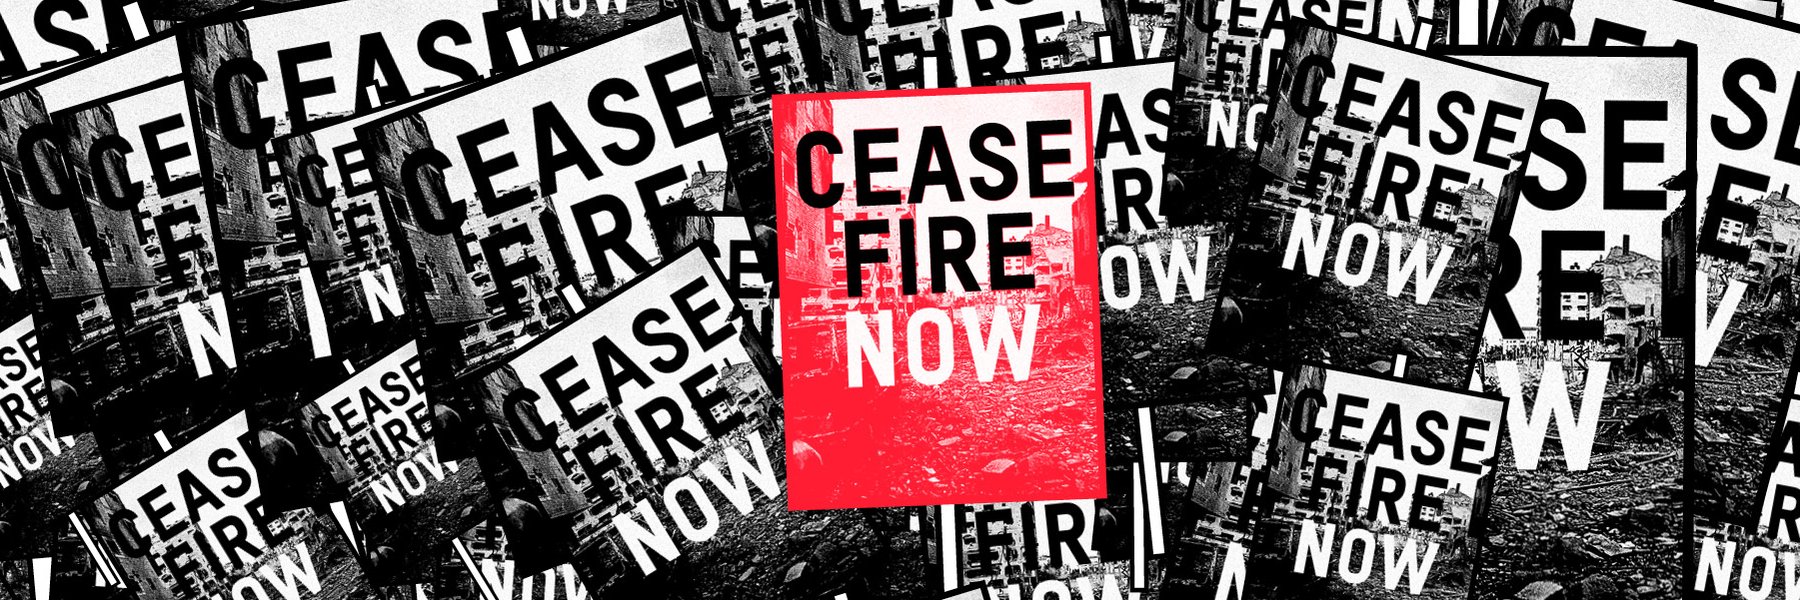 A graphic showing placards that say 'ceasefire now' on them.